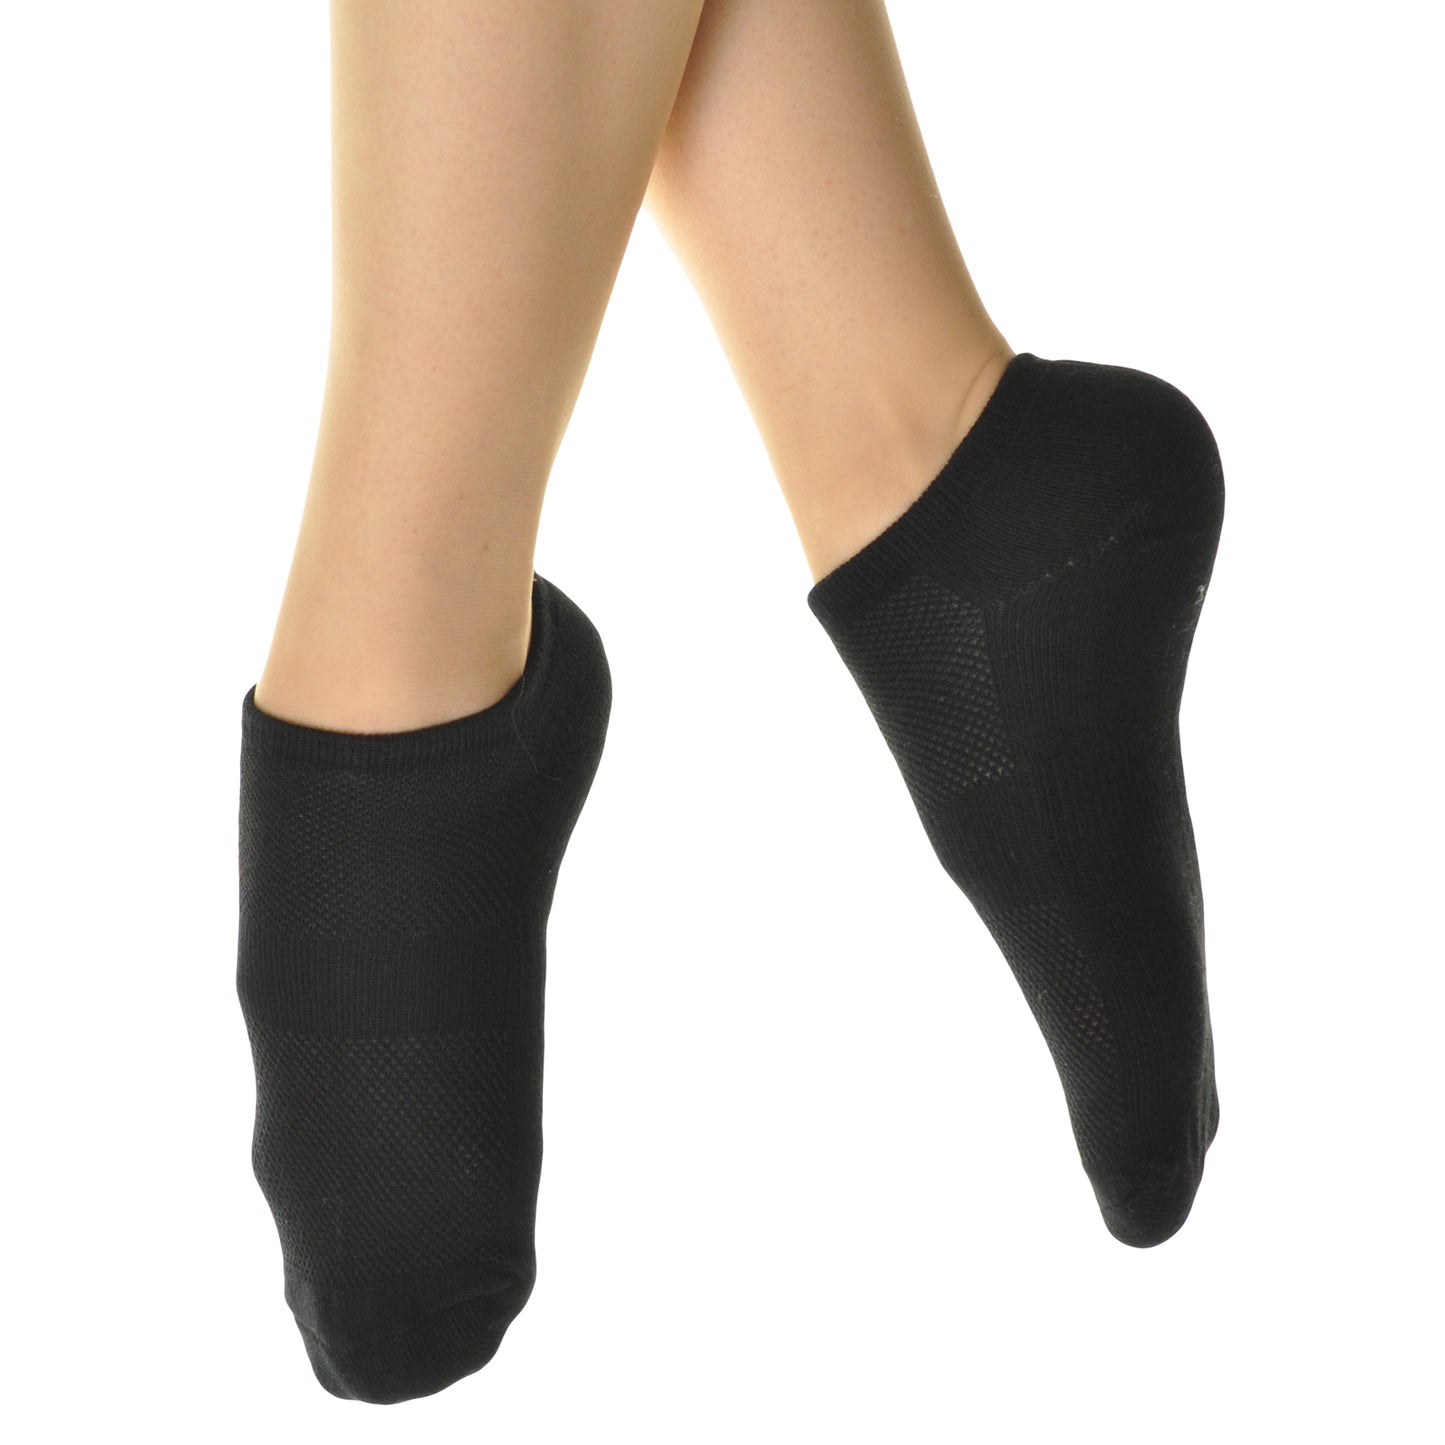 Angelina Unisex No-Show Socks with Cushioned Soles (12-Pack), #XNSOCK